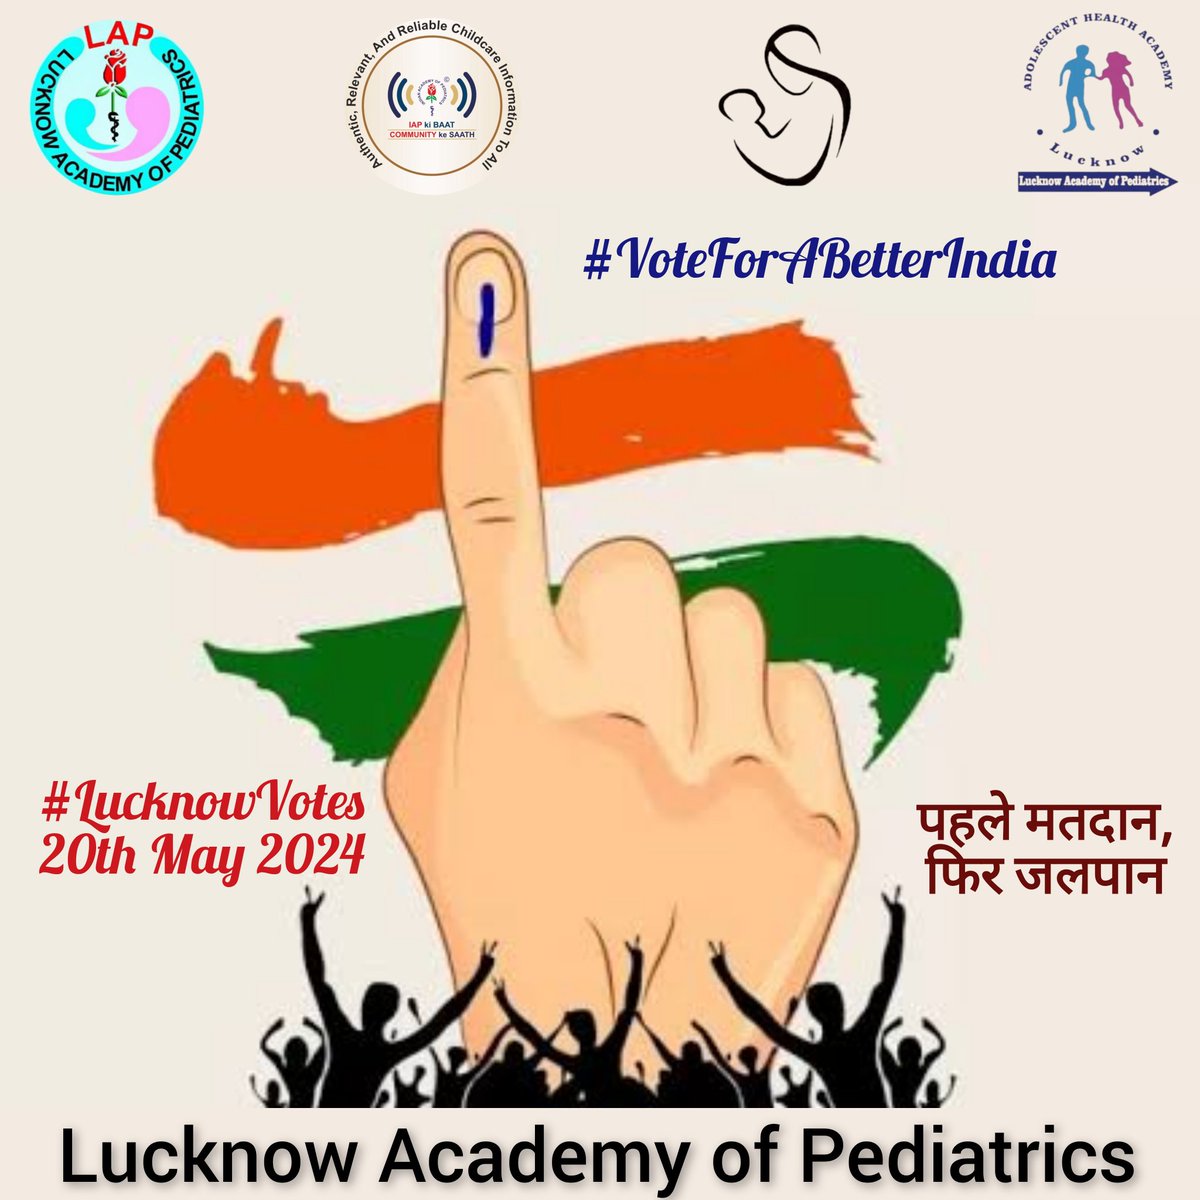 Lucknow Academy of Pediatrics urges all members to caste their valuable vote on 20th May & be part of building the nation #LucknowVotes #LAP #IAP #IAPlucknow #LAHA #AHA #lucknowacademyofpediatrics #LNF #NNF #IAPkiBaatCOMMUNITYkeSaath